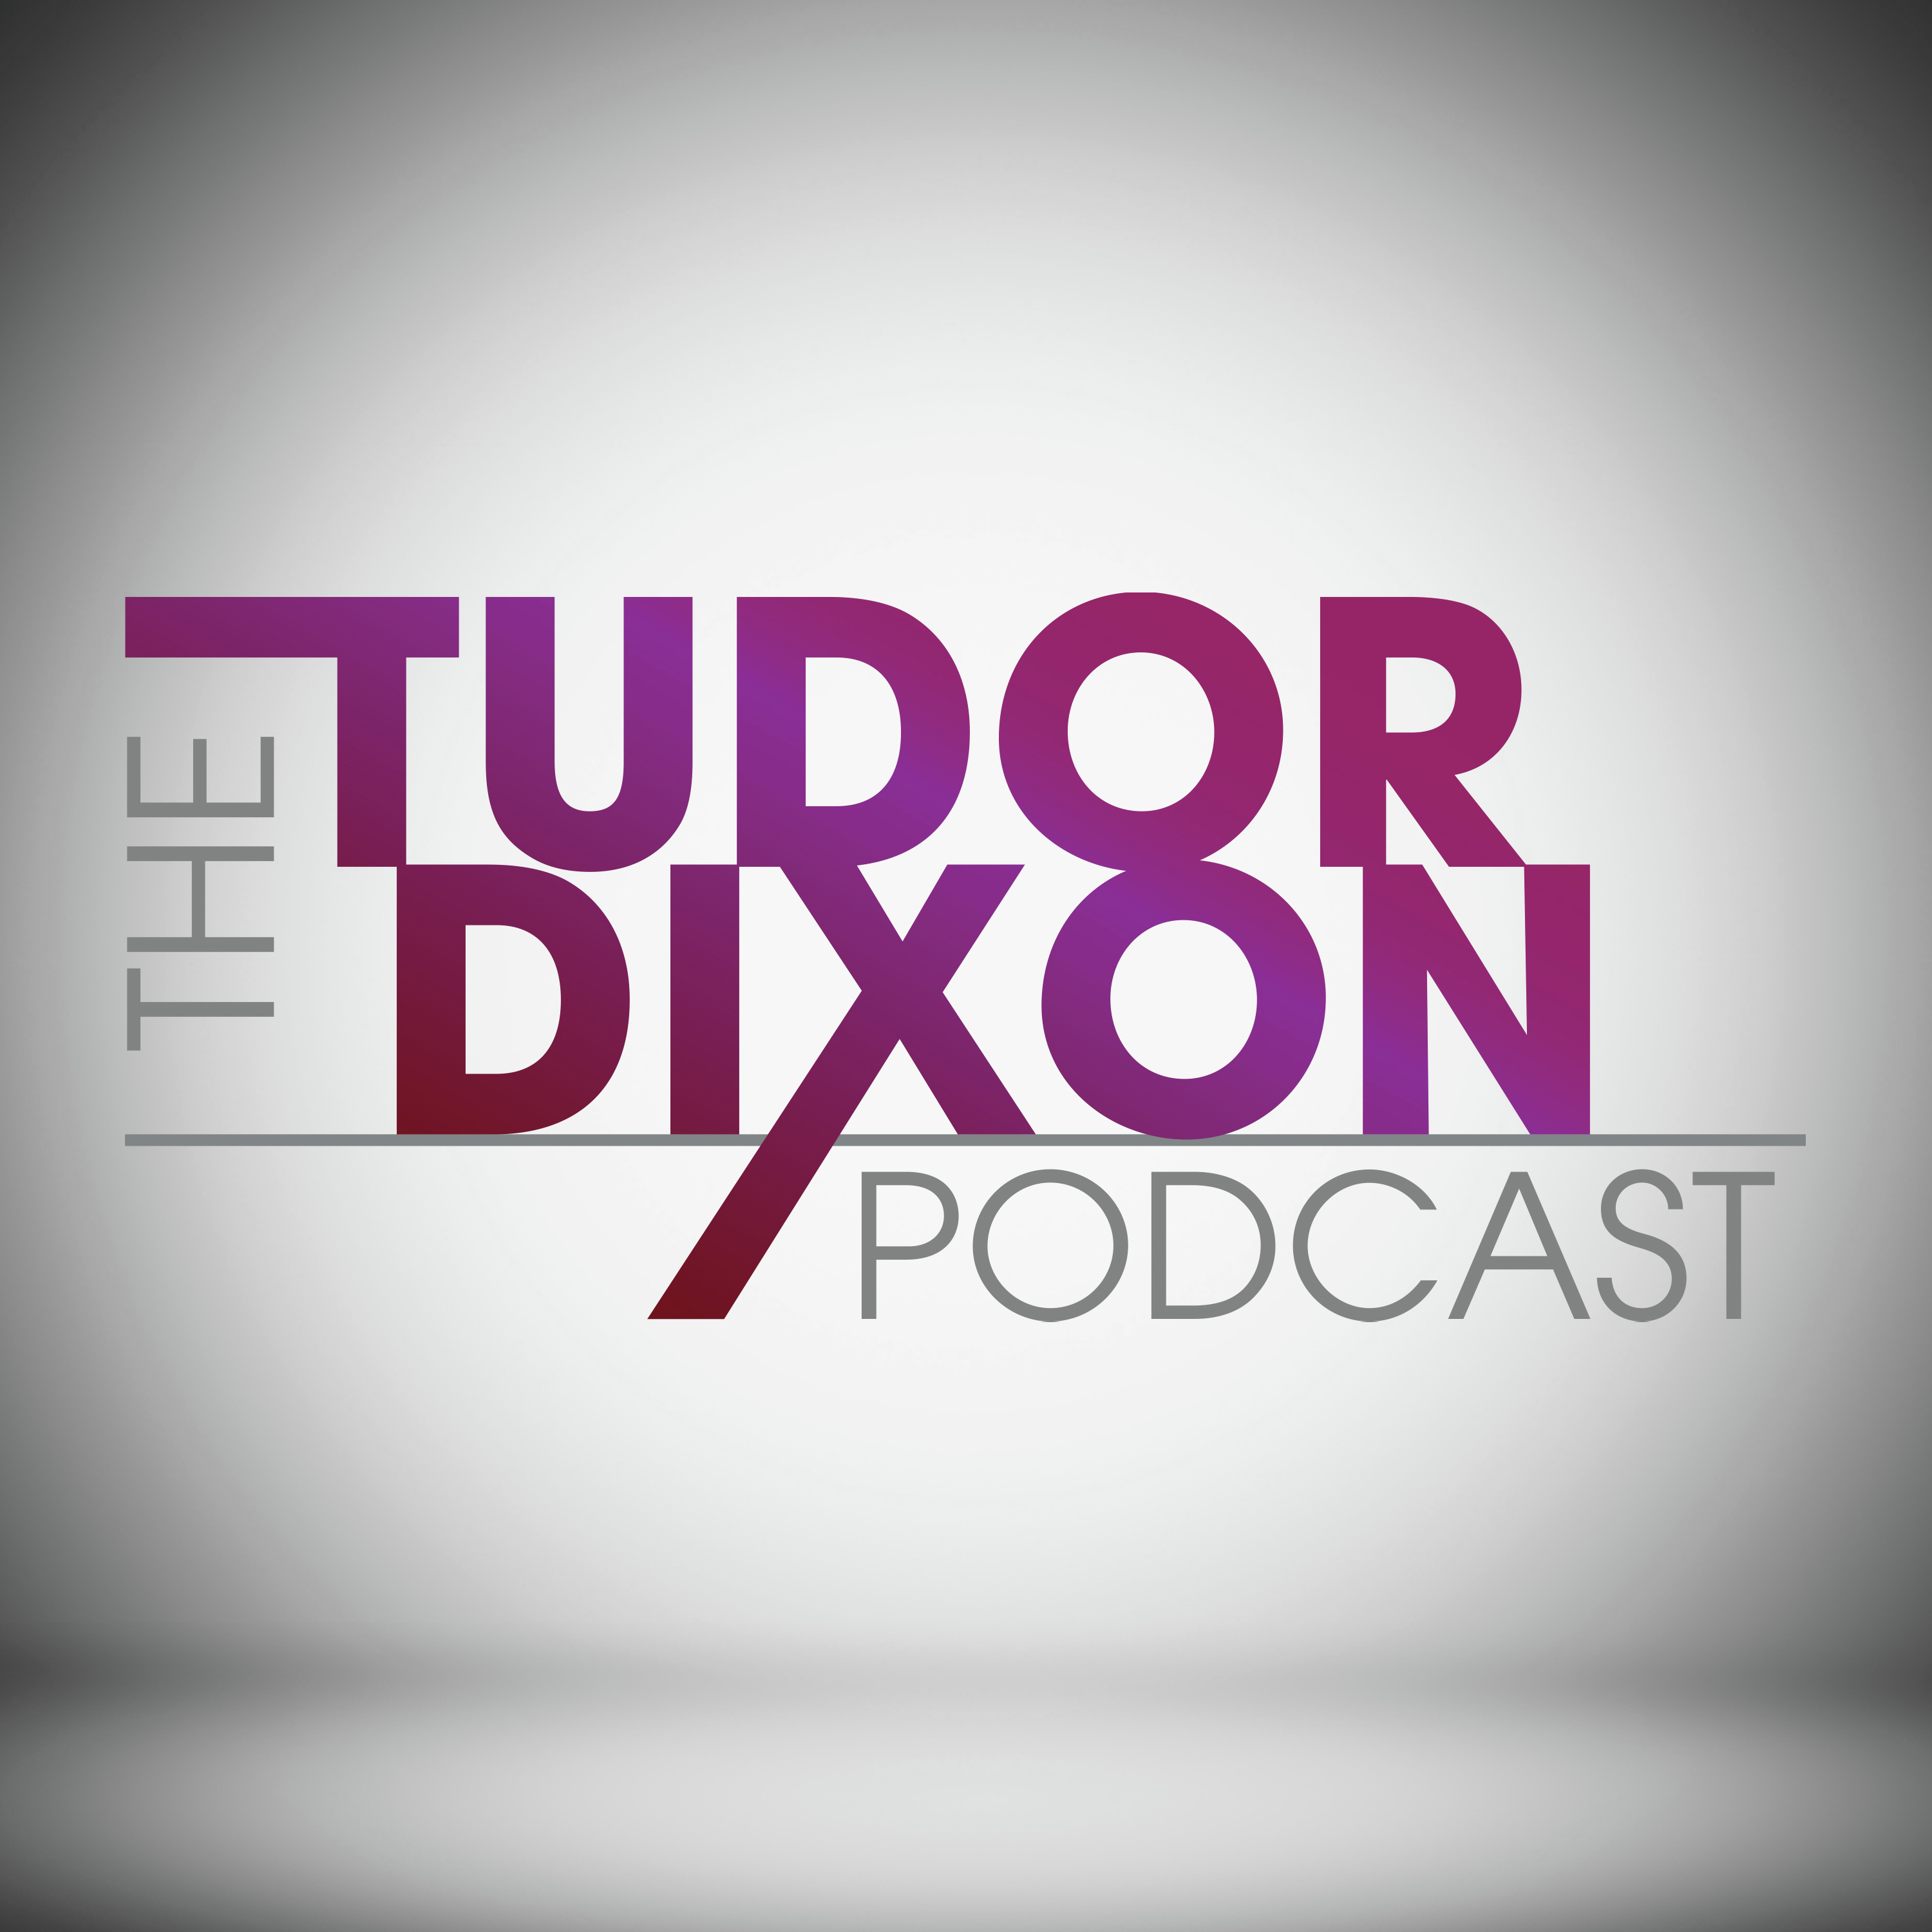 The Tudor Dixon Podcast: United Republicans Vs. Freaked Out Democrats with Stacy Washington